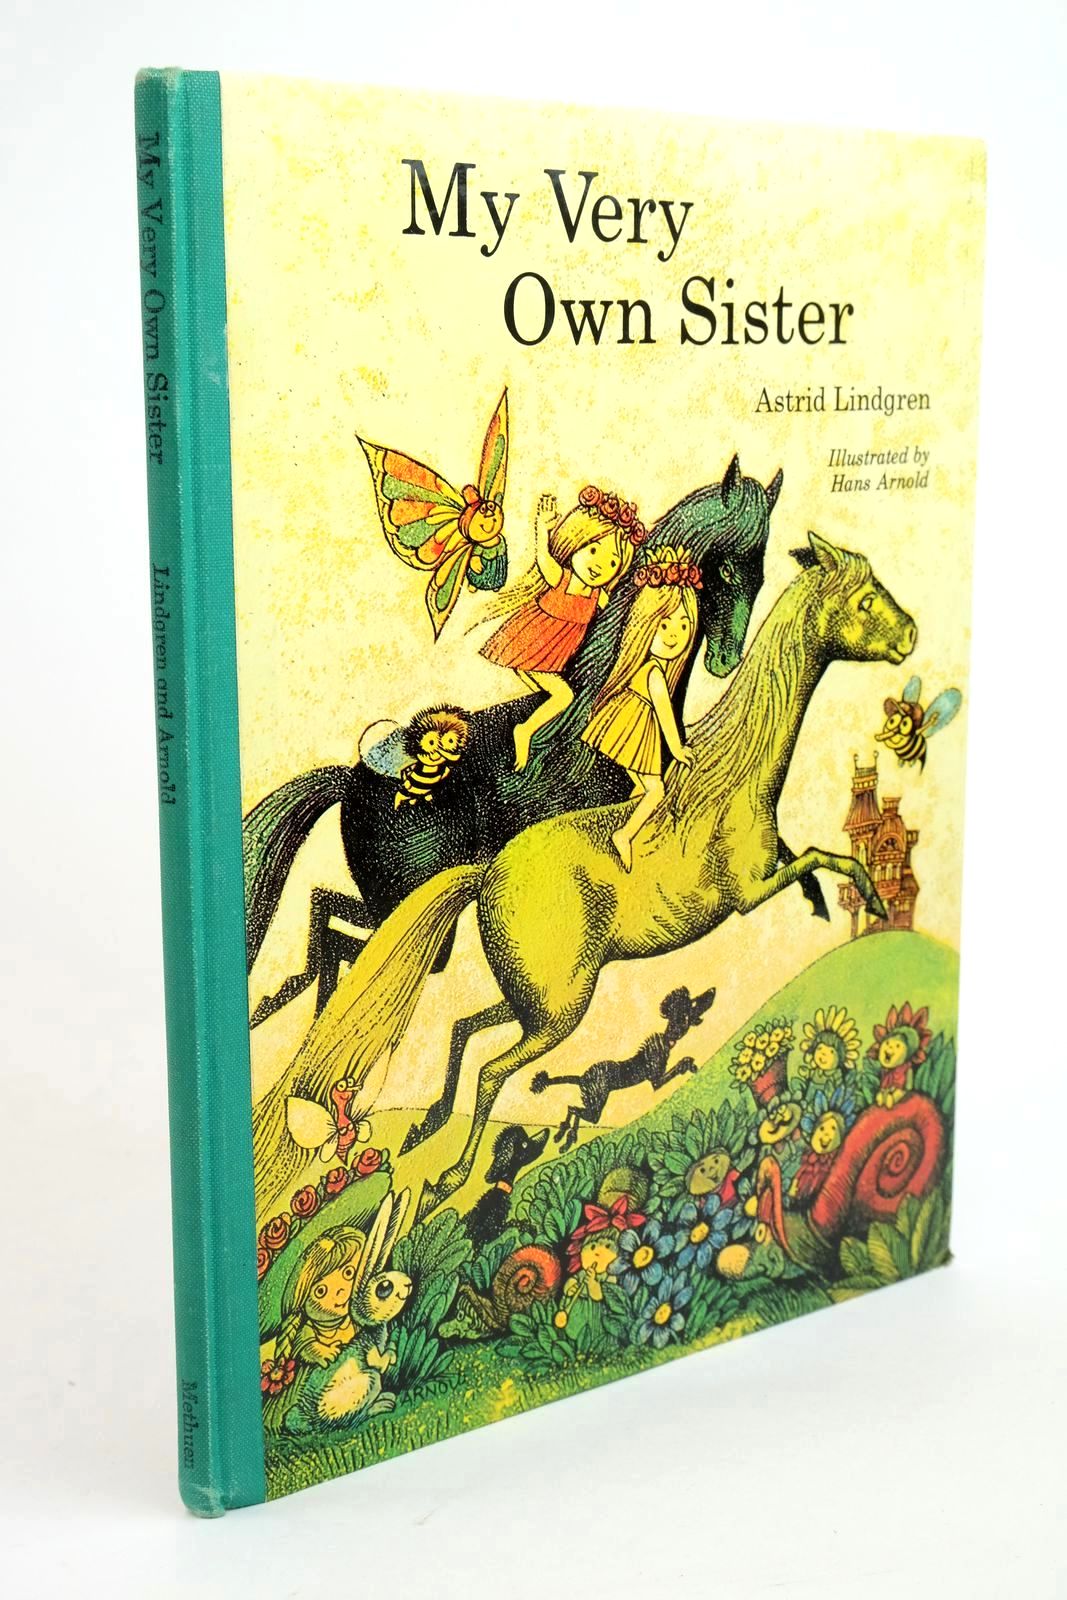 Photo of MY VERY OWN SISTER written by Lindgren, Astrid illustrated by Arnold, Hans published by Methuen Children's Books Ltd. (STOCK CODE: 1321866)  for sale by Stella & Rose's Books